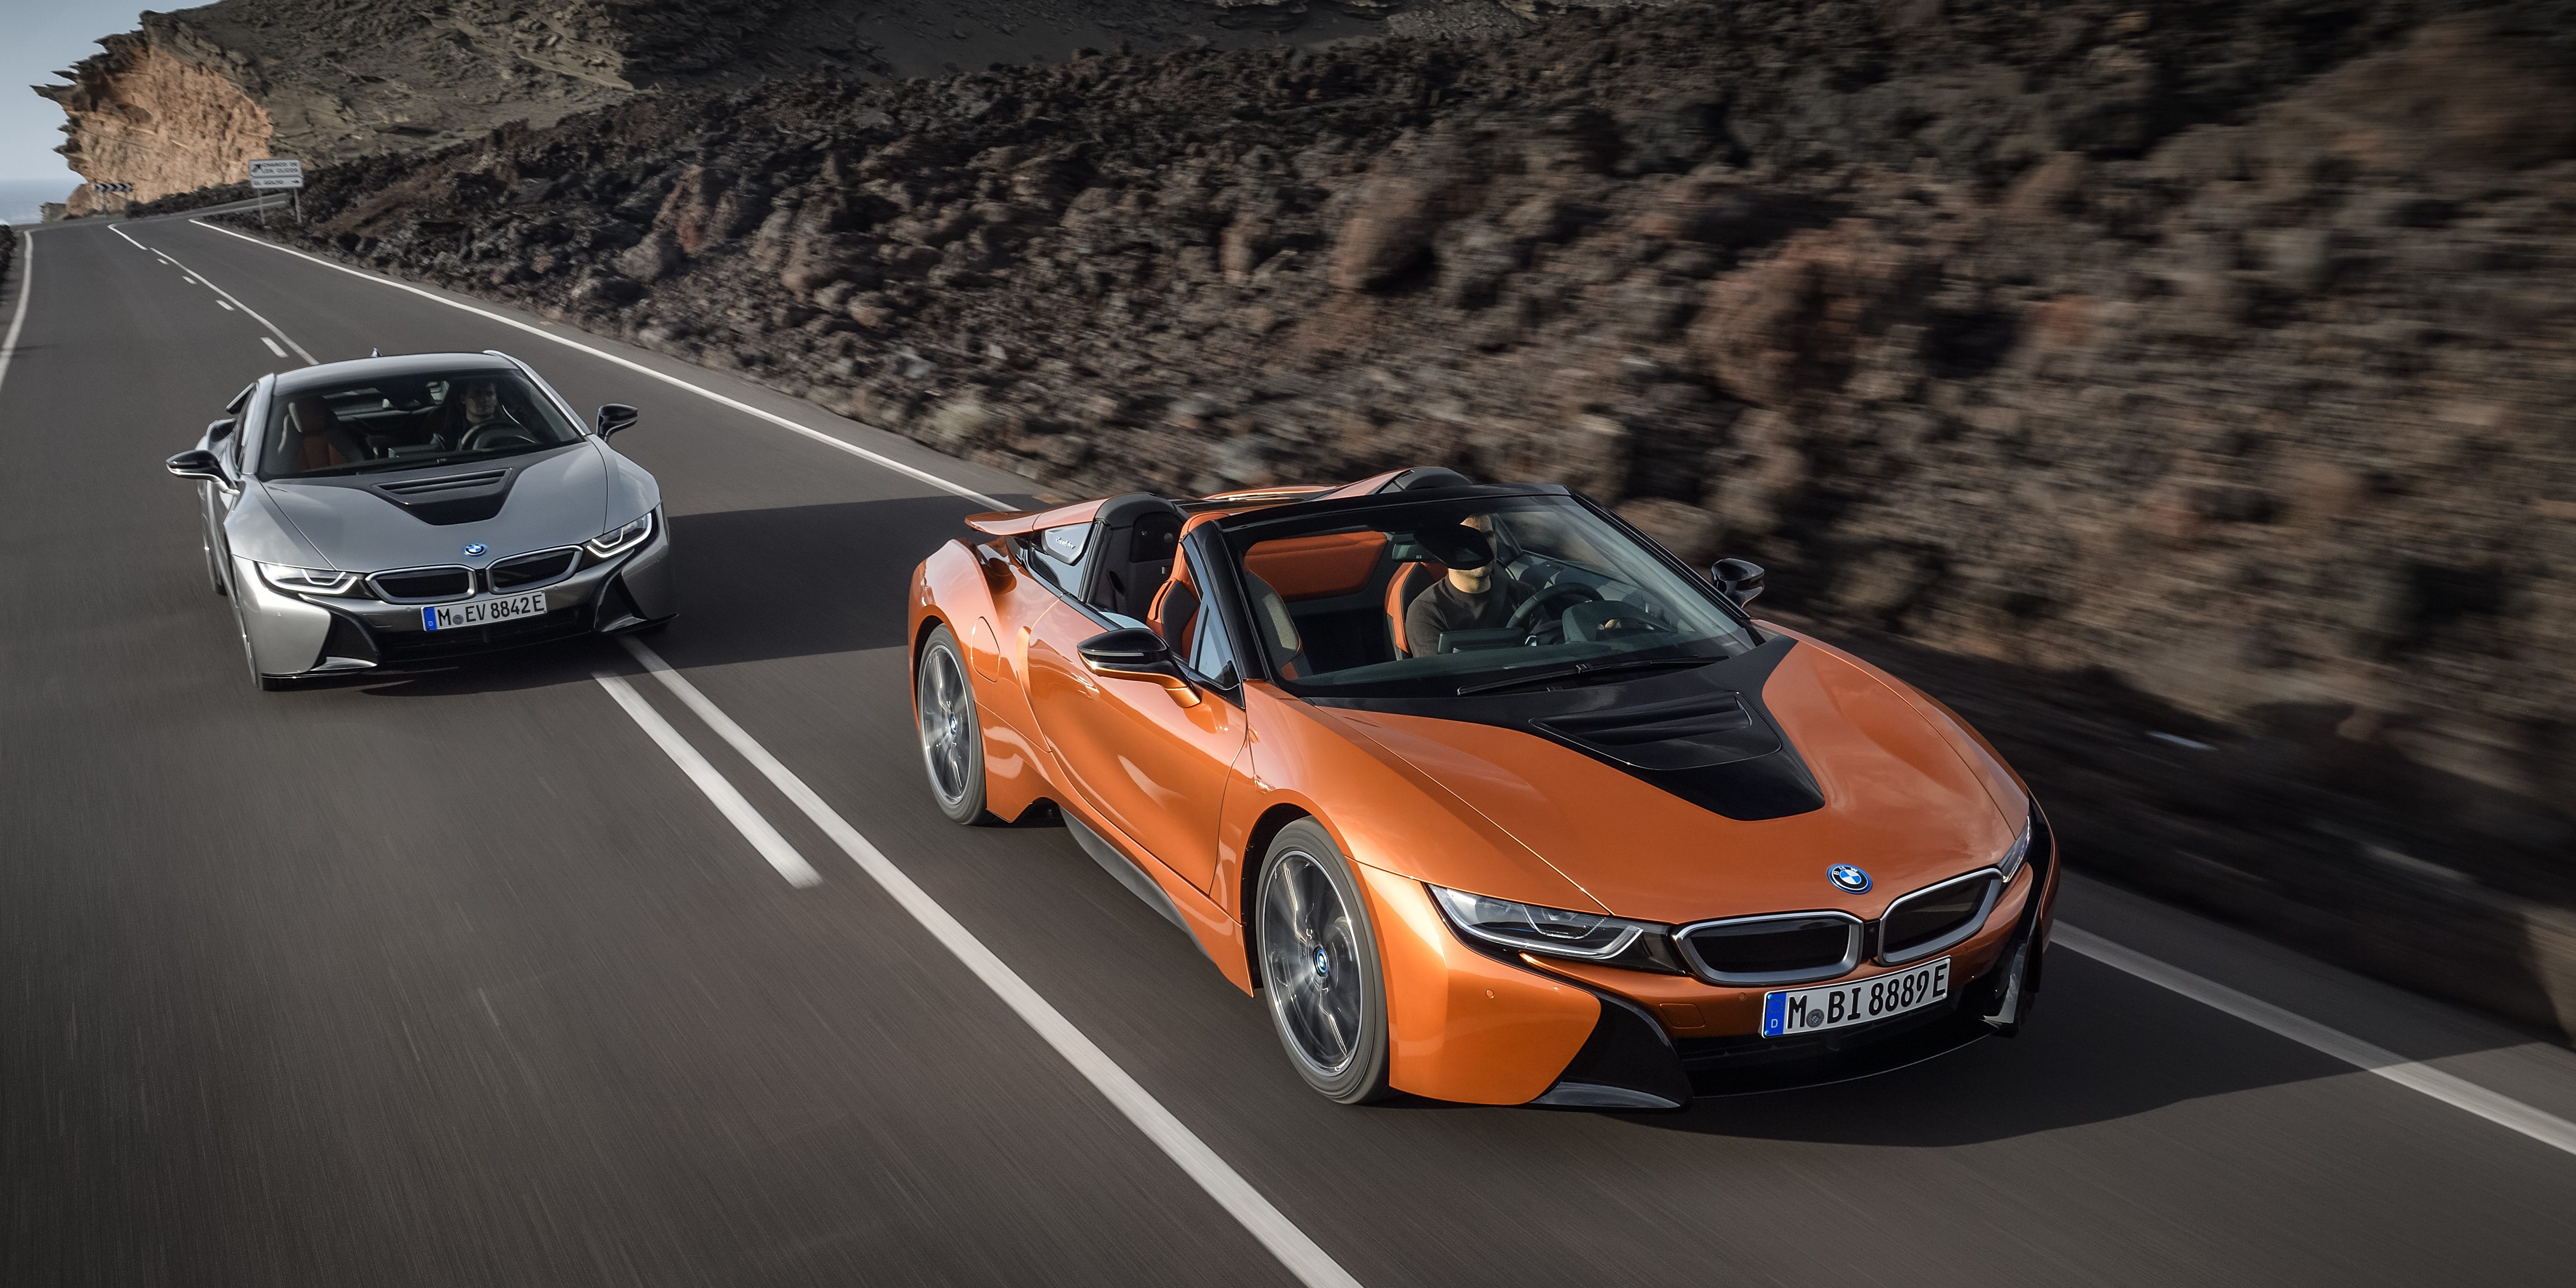 Video: How to Pop Open the BMW i8 Hood